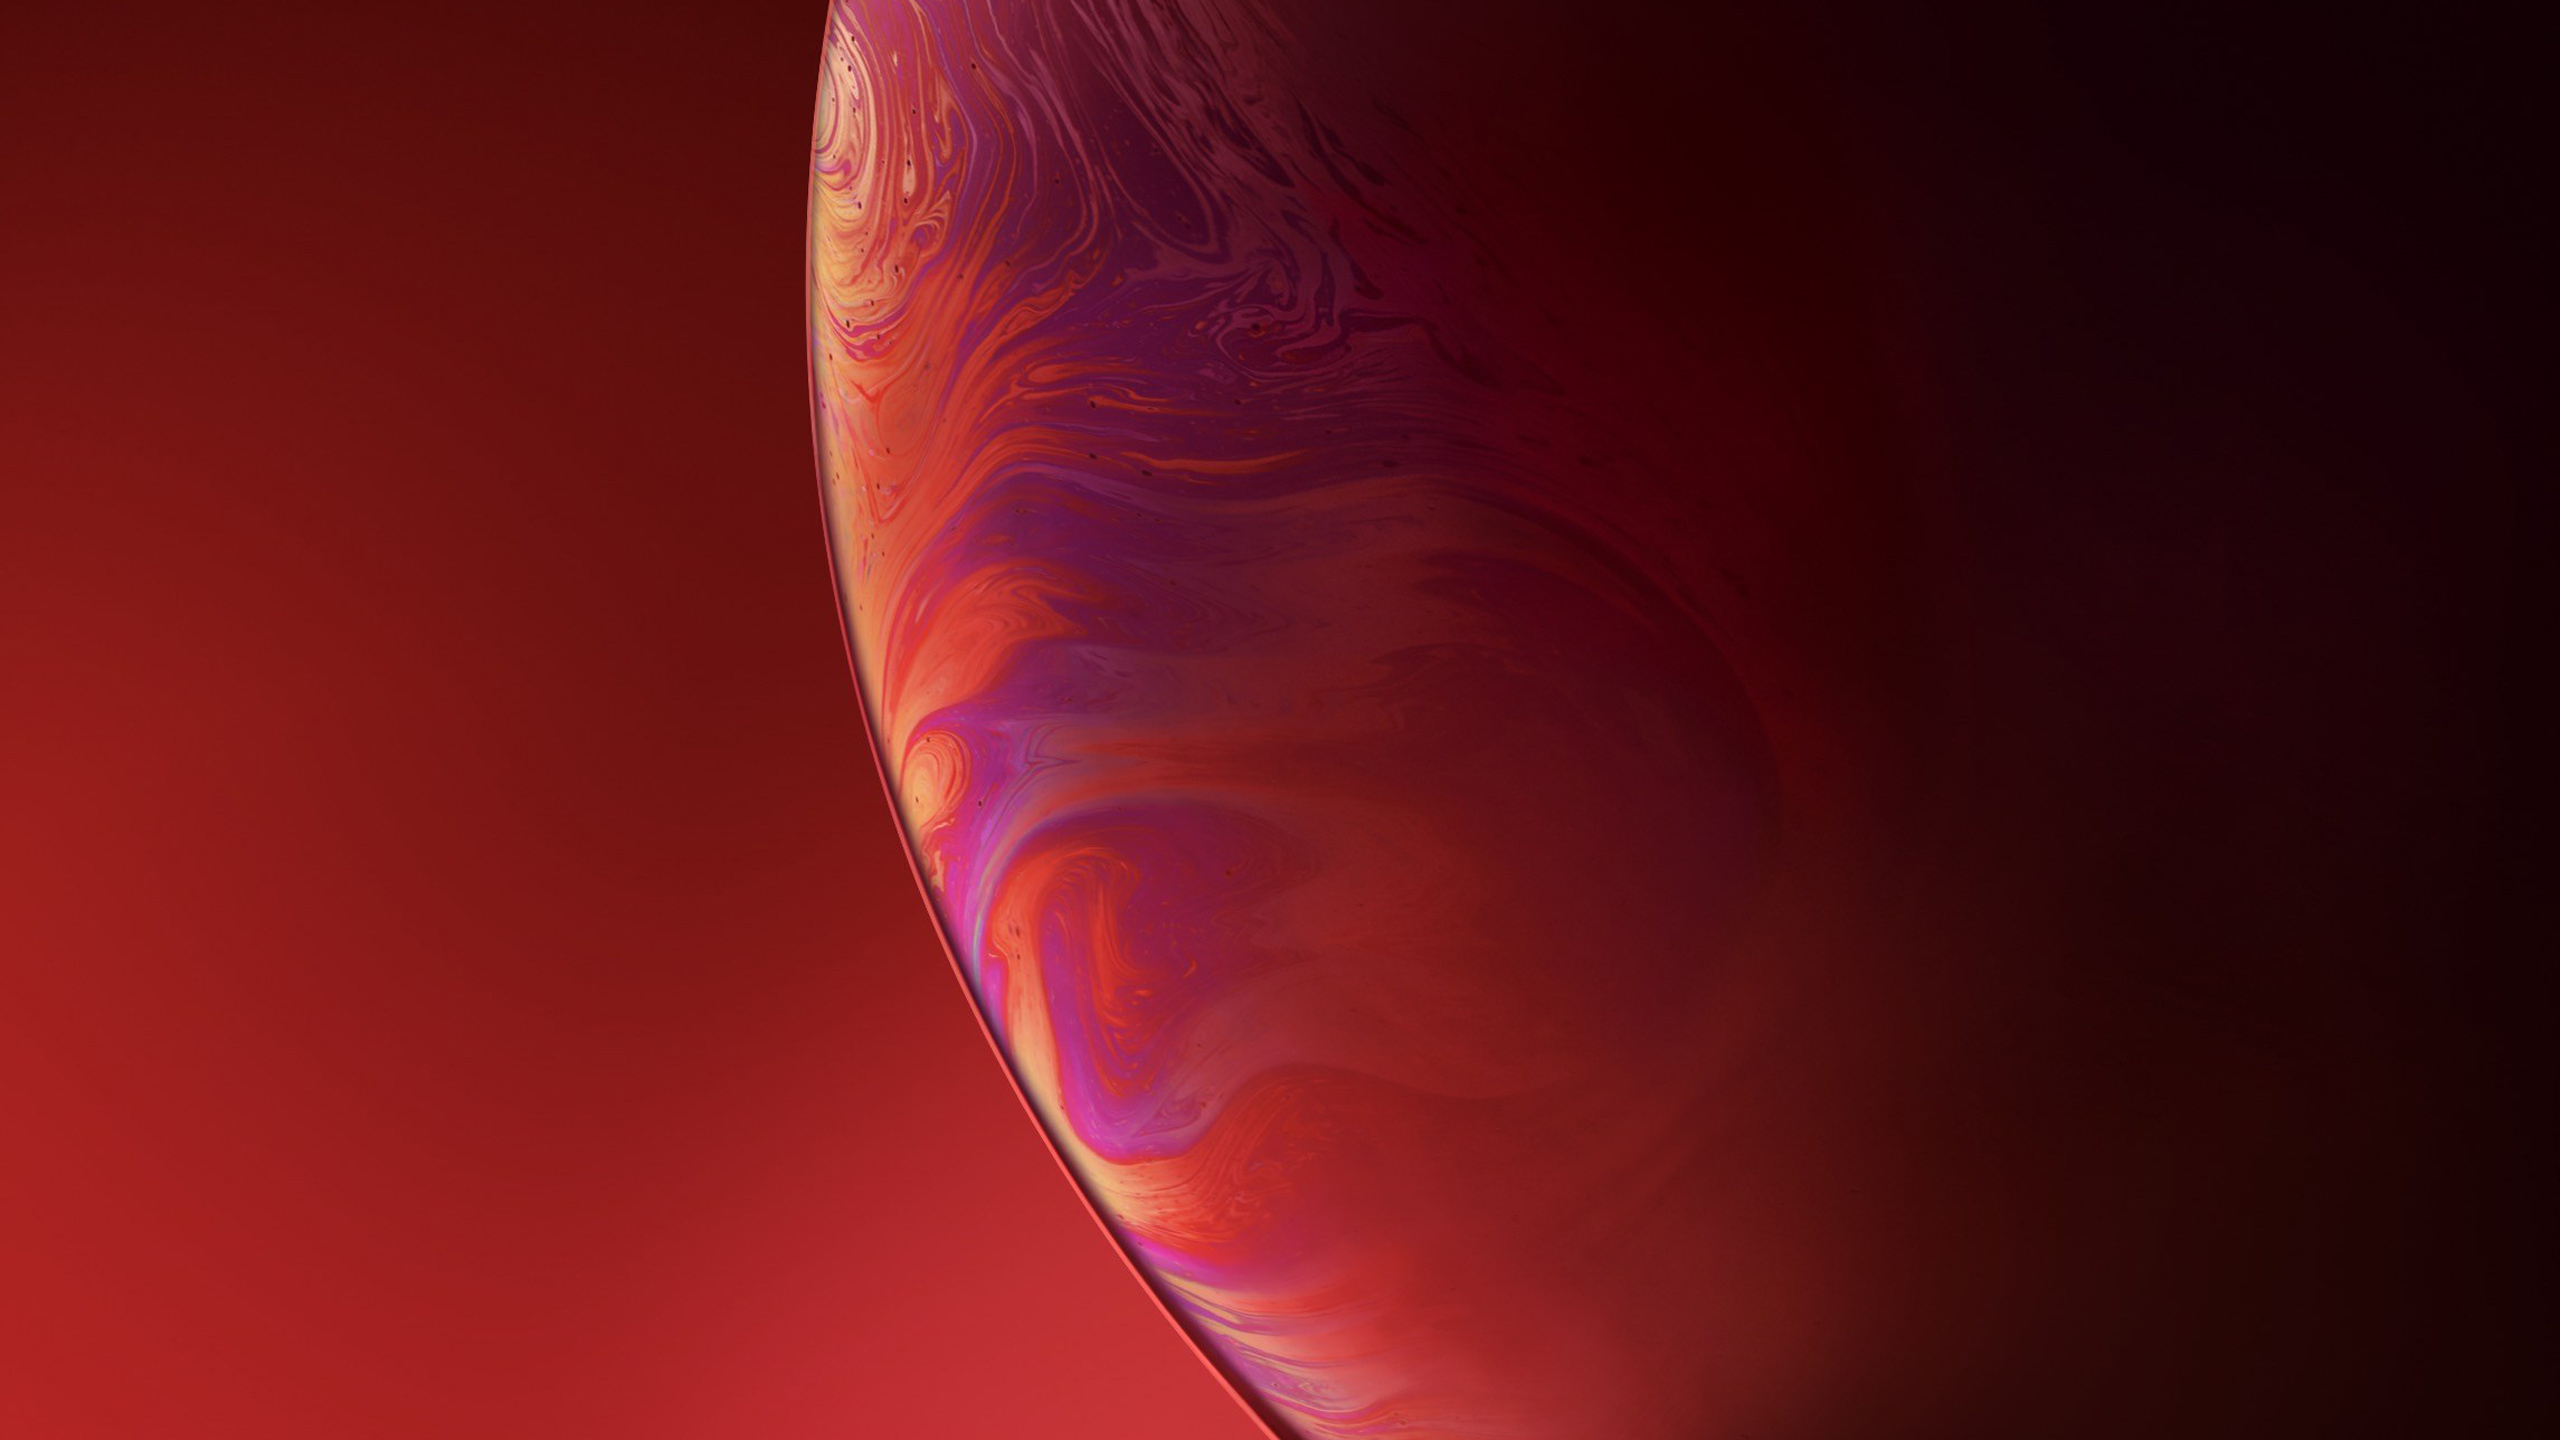 Iphone Xr Double Bubble Red Hd Computer 4k Wallpapers Images Backgrounds Photos And Pictures 4k winter wallpapers for iphone ipad or macbook.